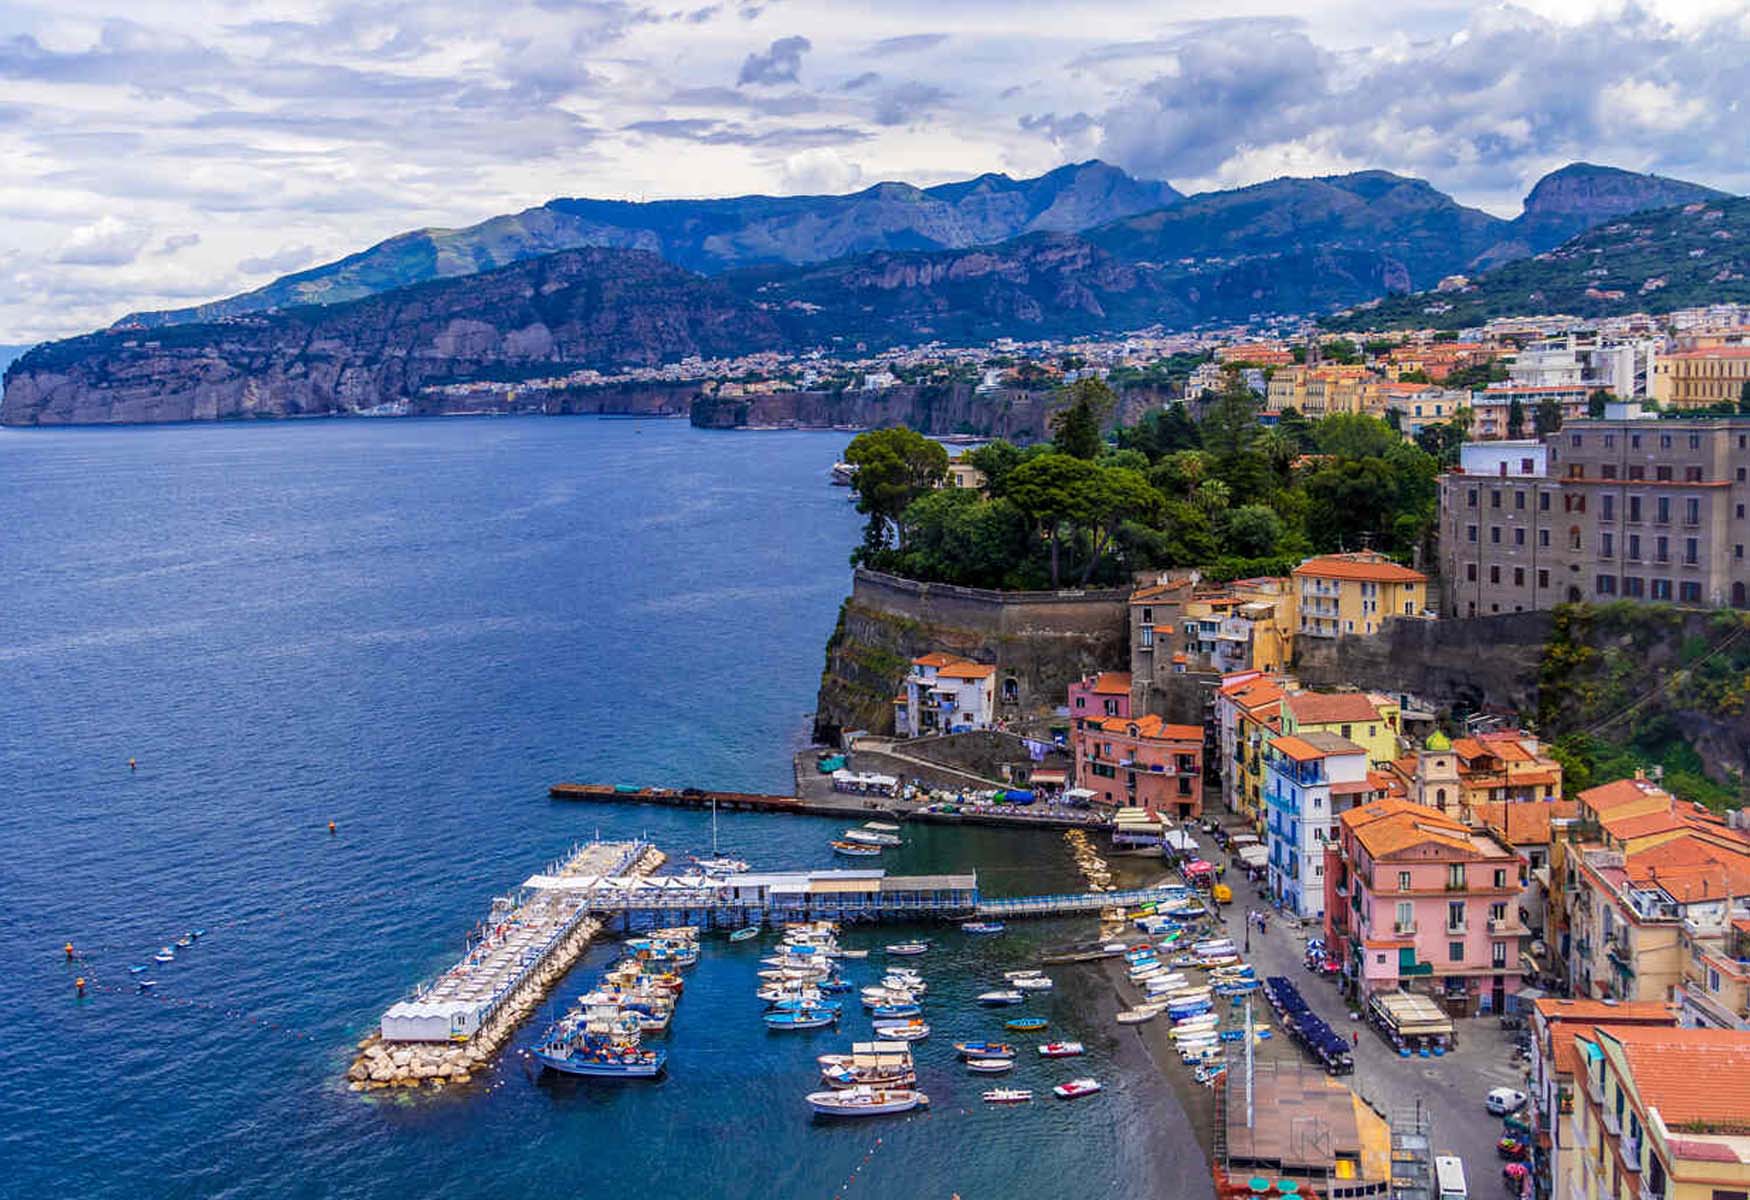 Where To Stay In Sorrento: The BEST Areas